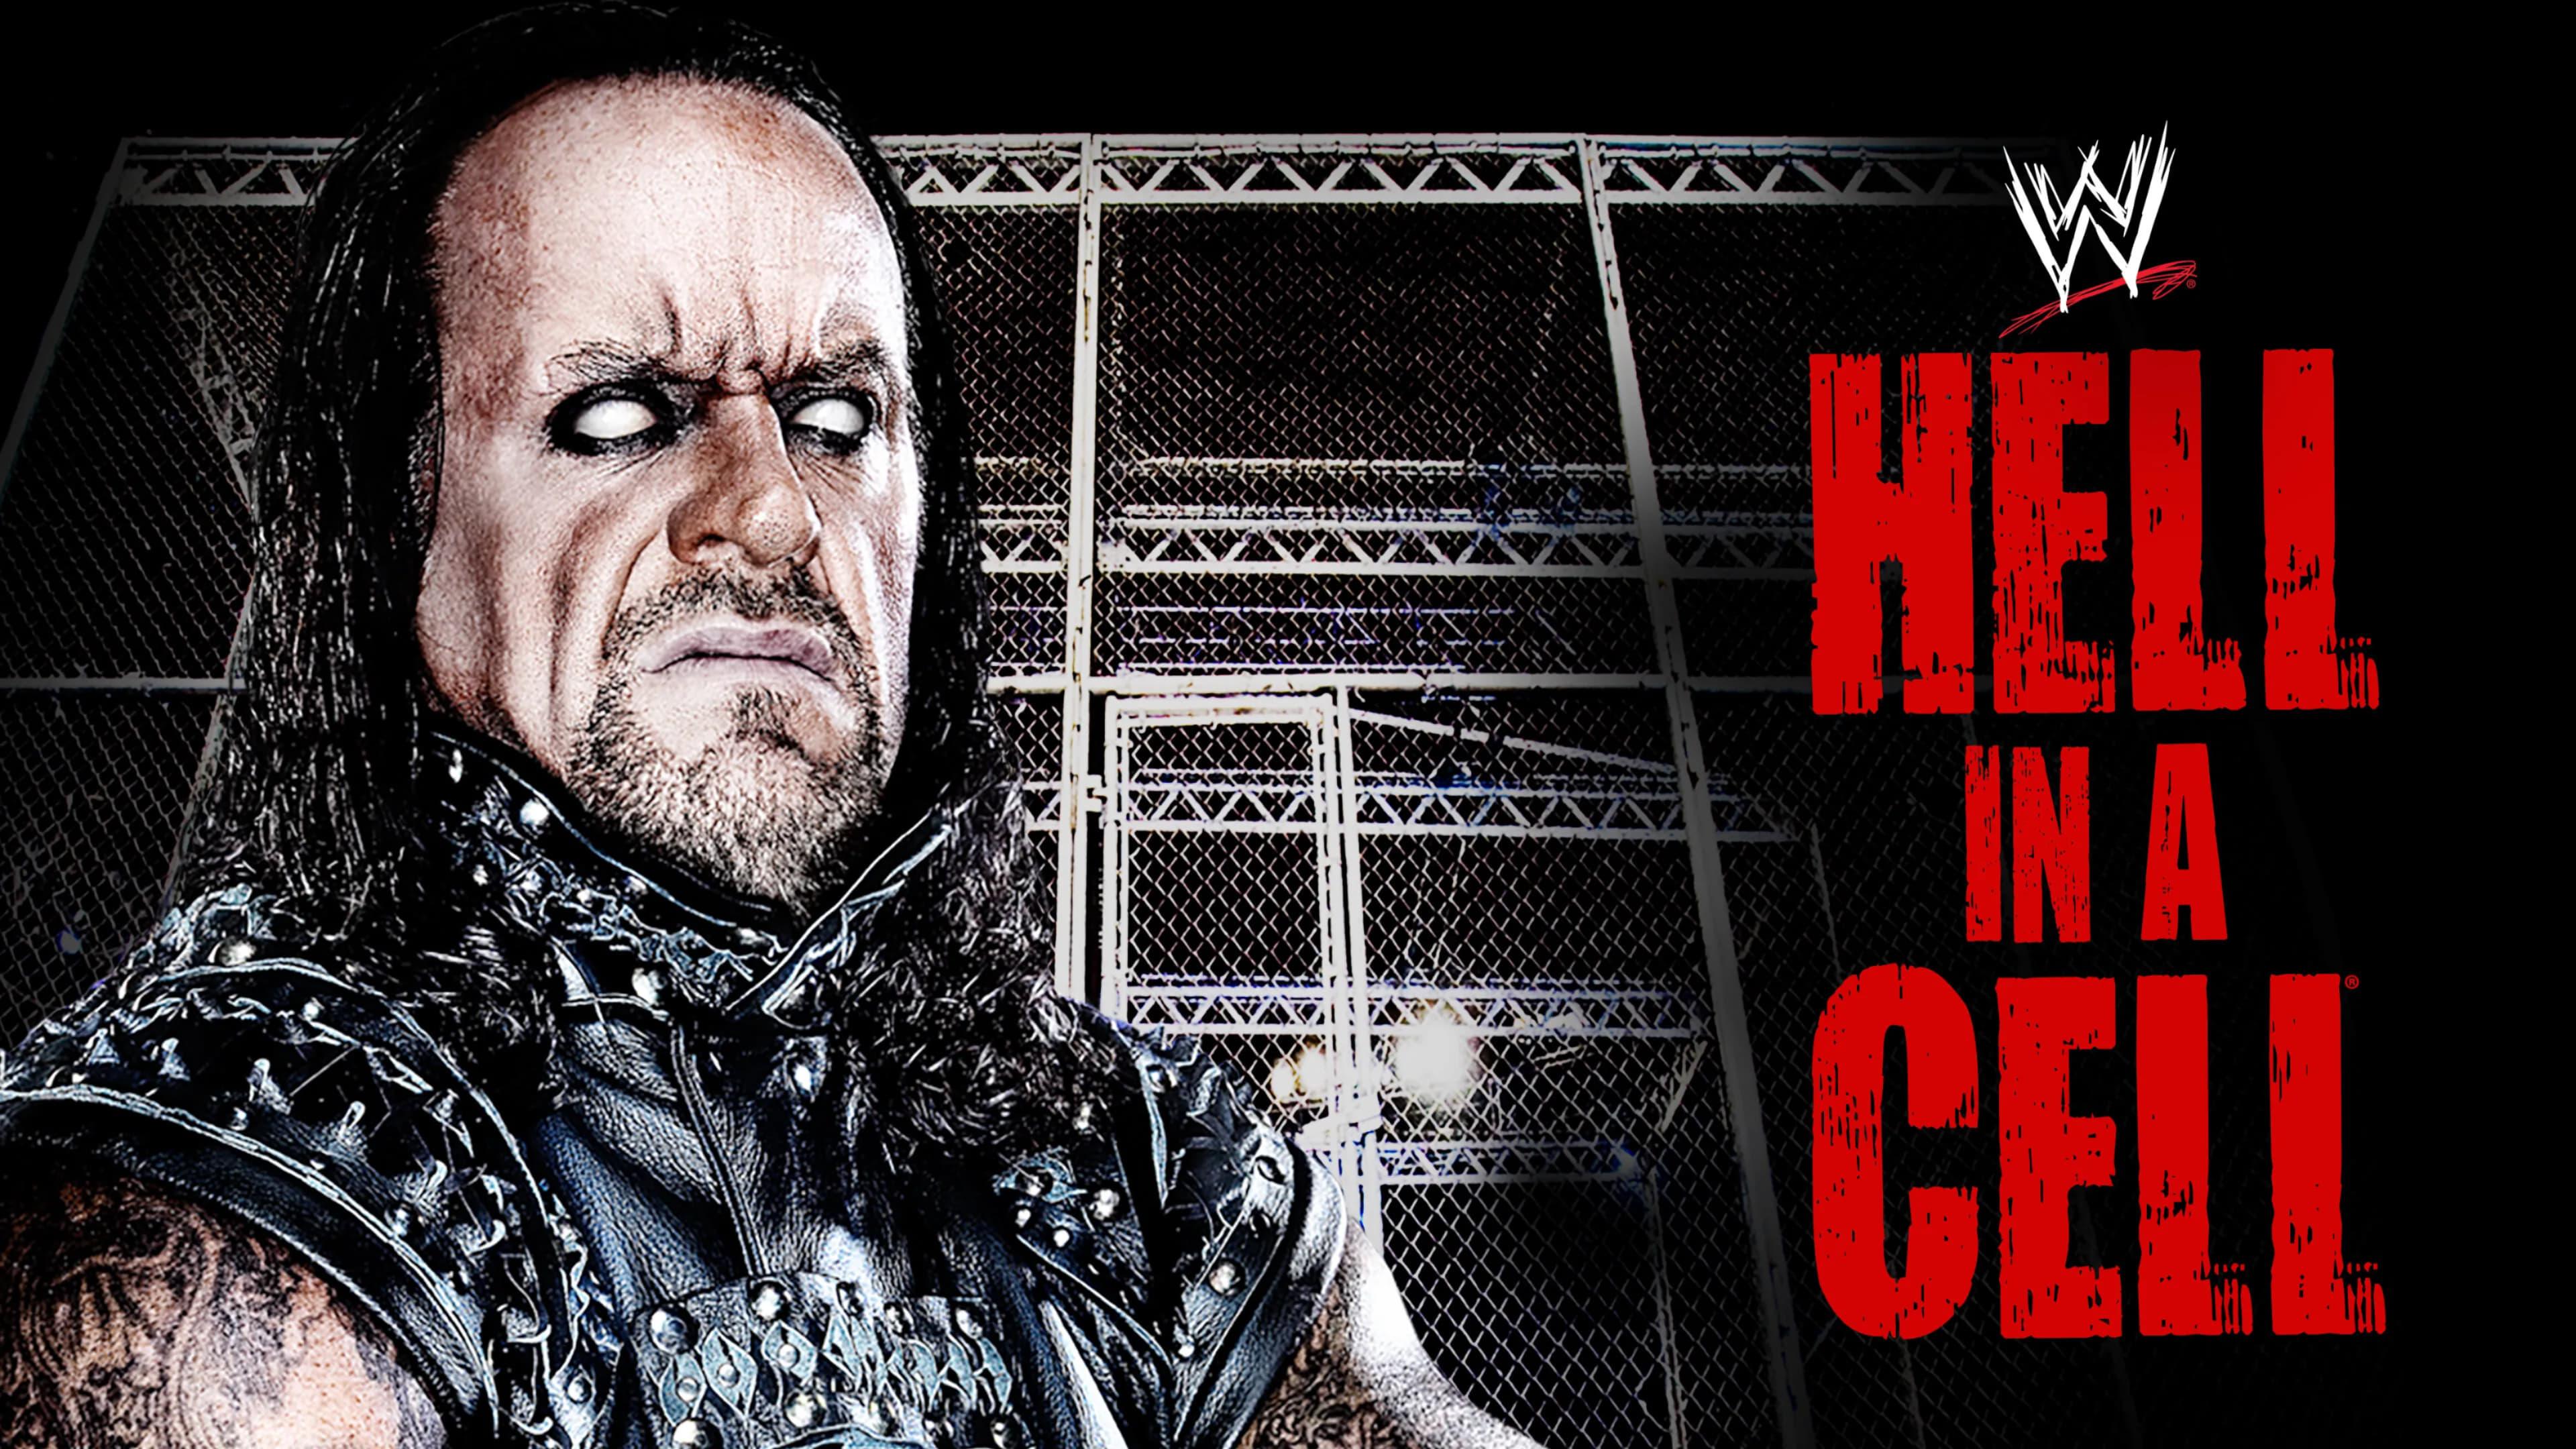 WWE Hell In A Cell 2010 backdrop